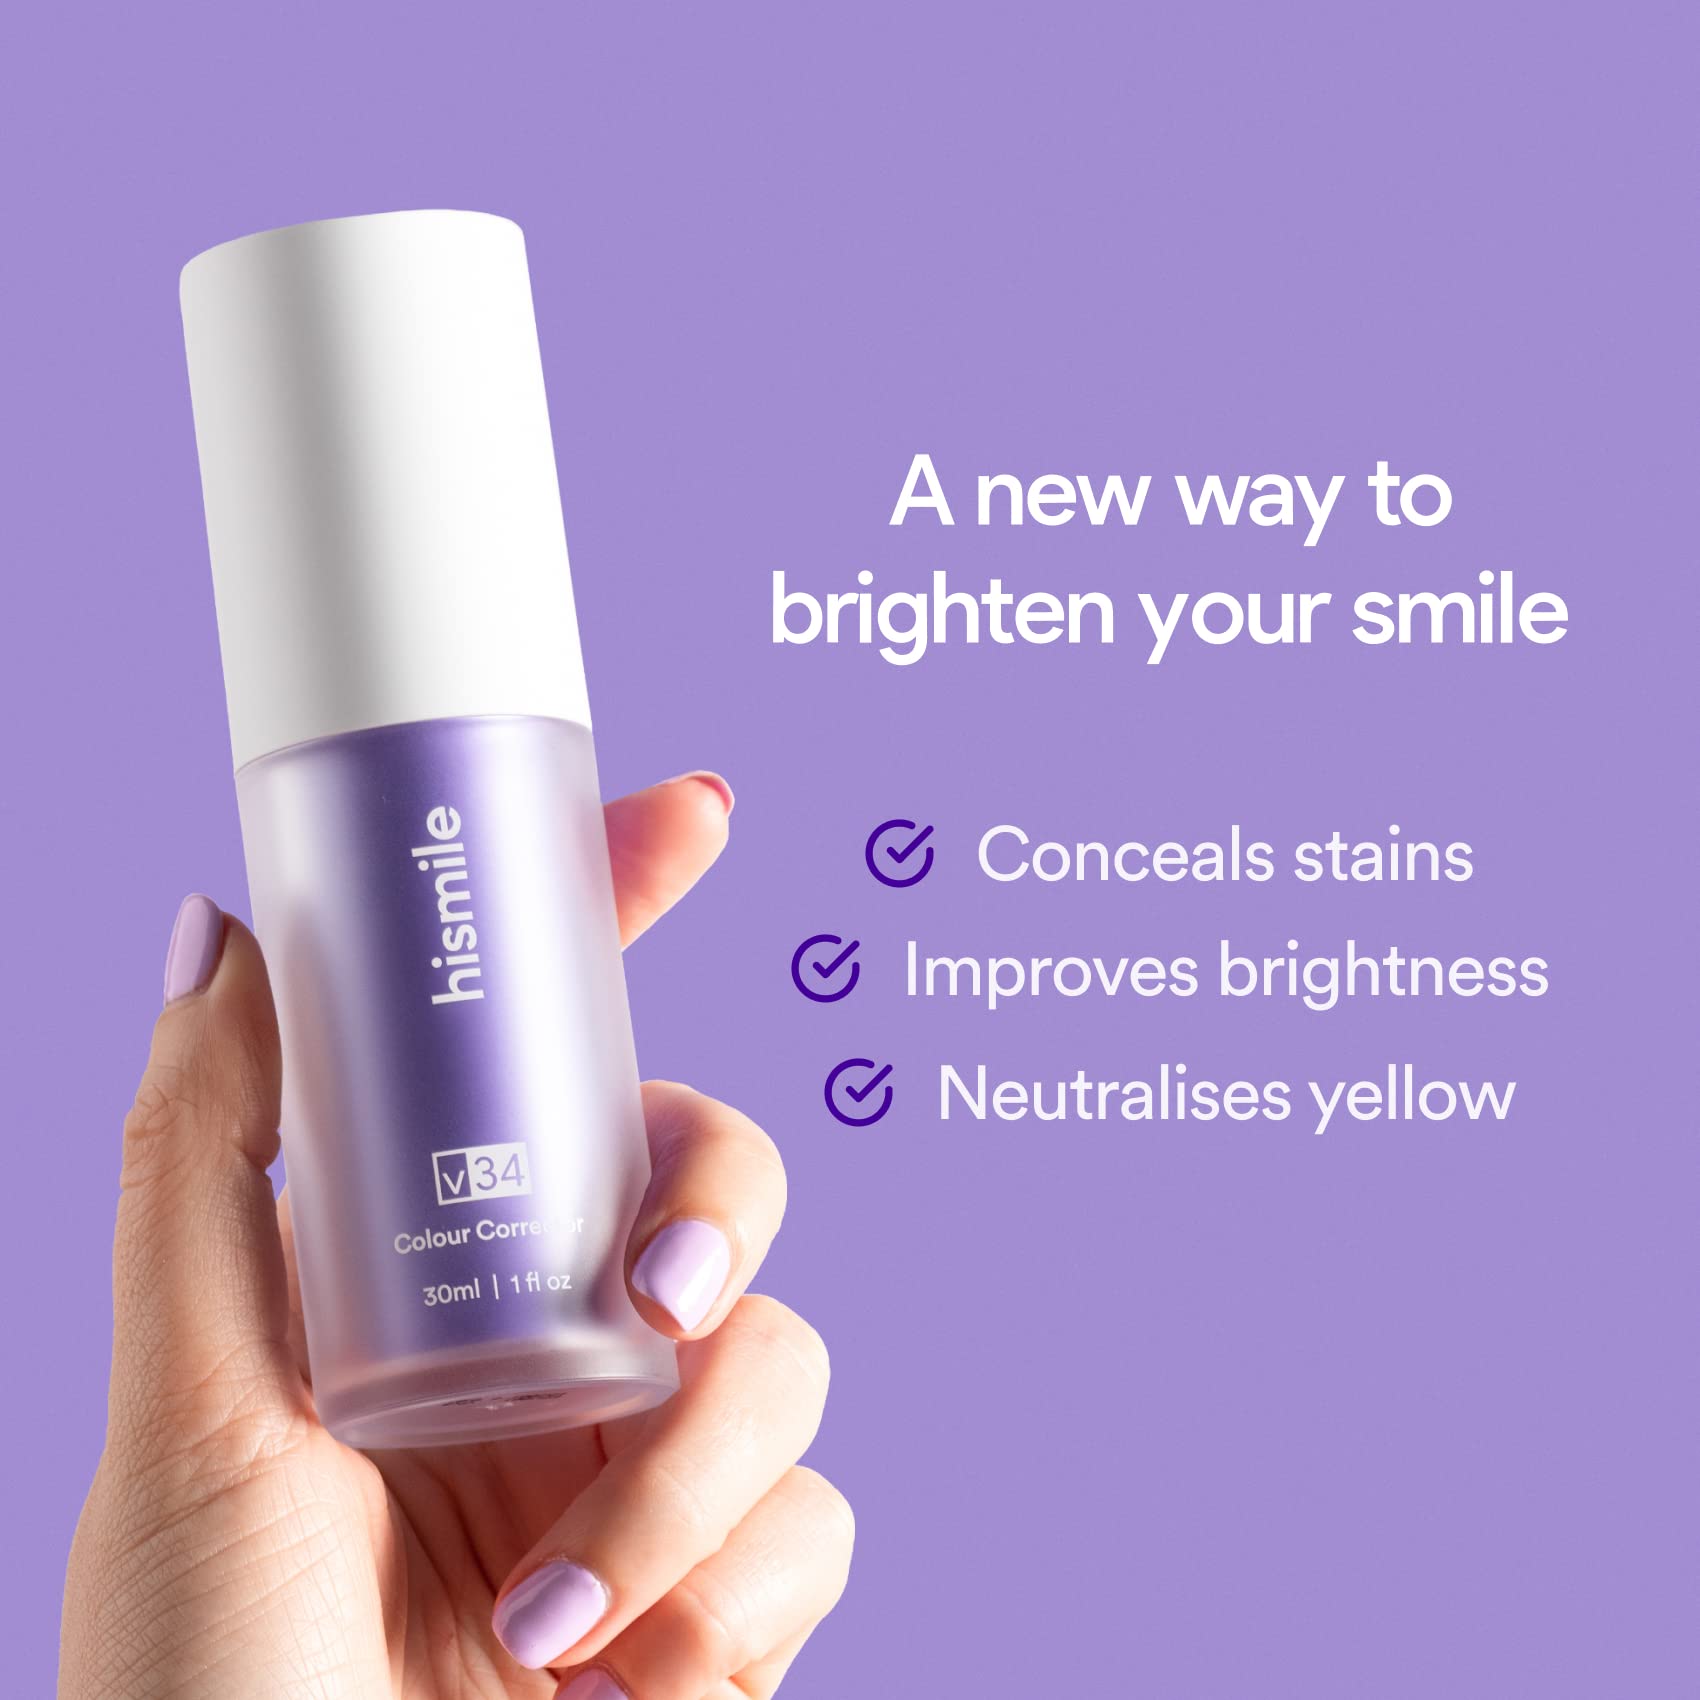 Hismile v34 Colour Corrector, Tooth Stain Removal, Teeth Whitening Booster, Purple Toothpaste, Colour Correcting, Hismile V34, Hismile Colour Corrector, Tooth Colour Corrector